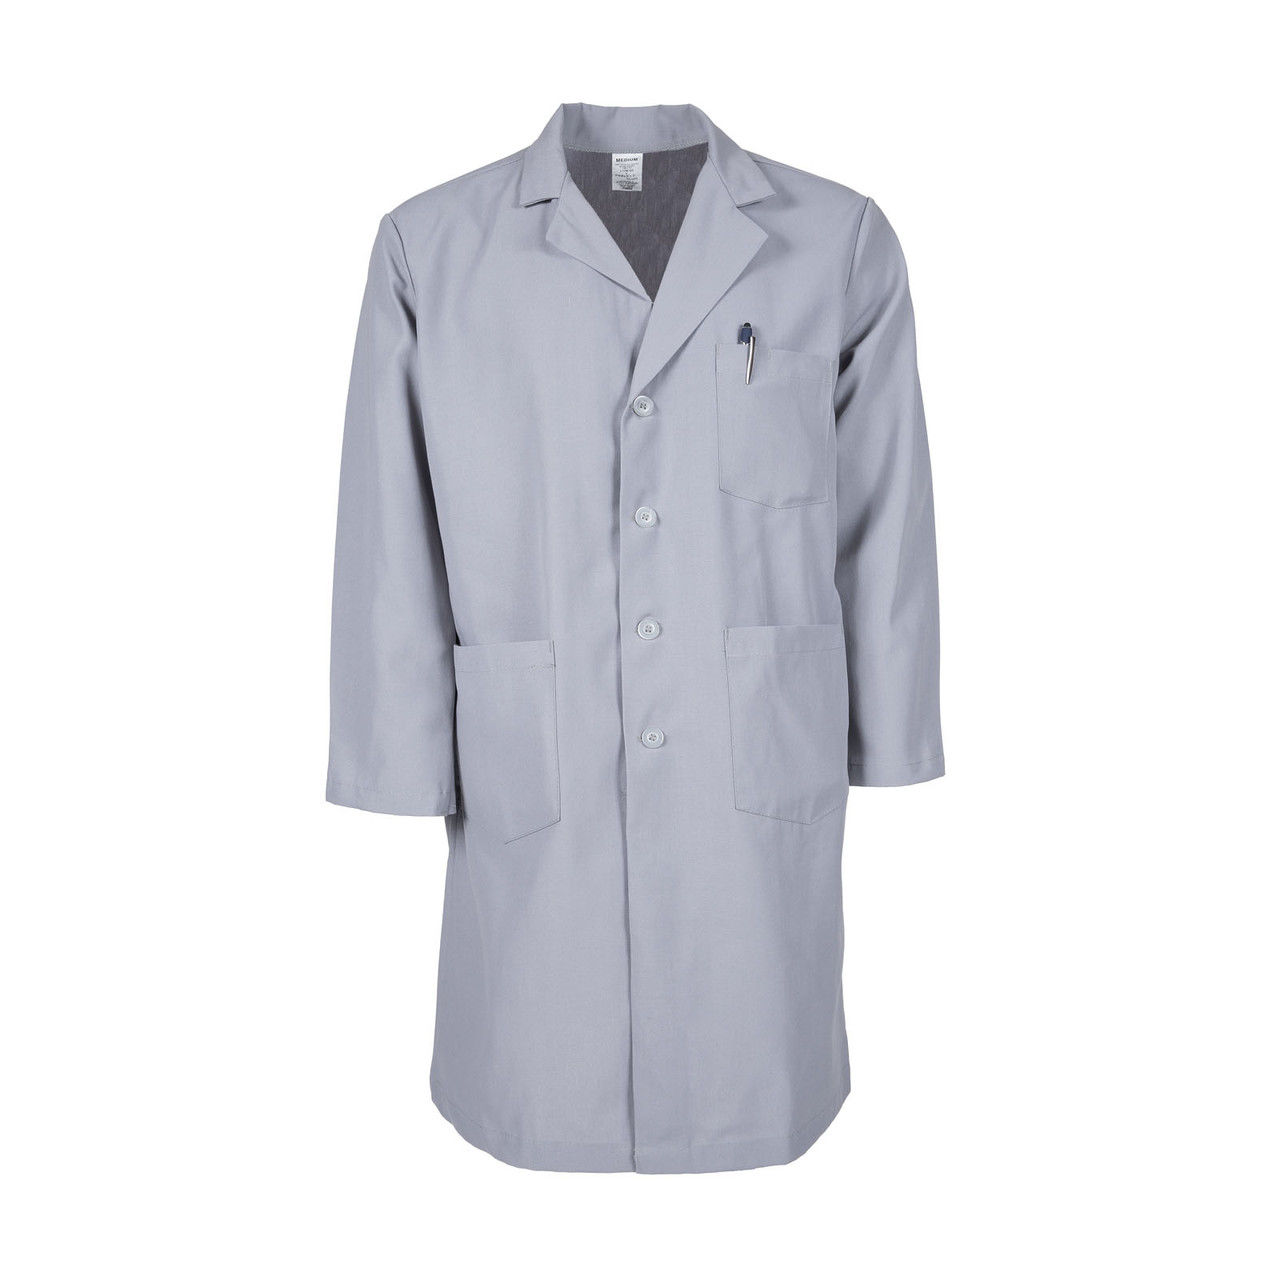 What are the quality standards for the L17M Grey Men's Lab Coat?